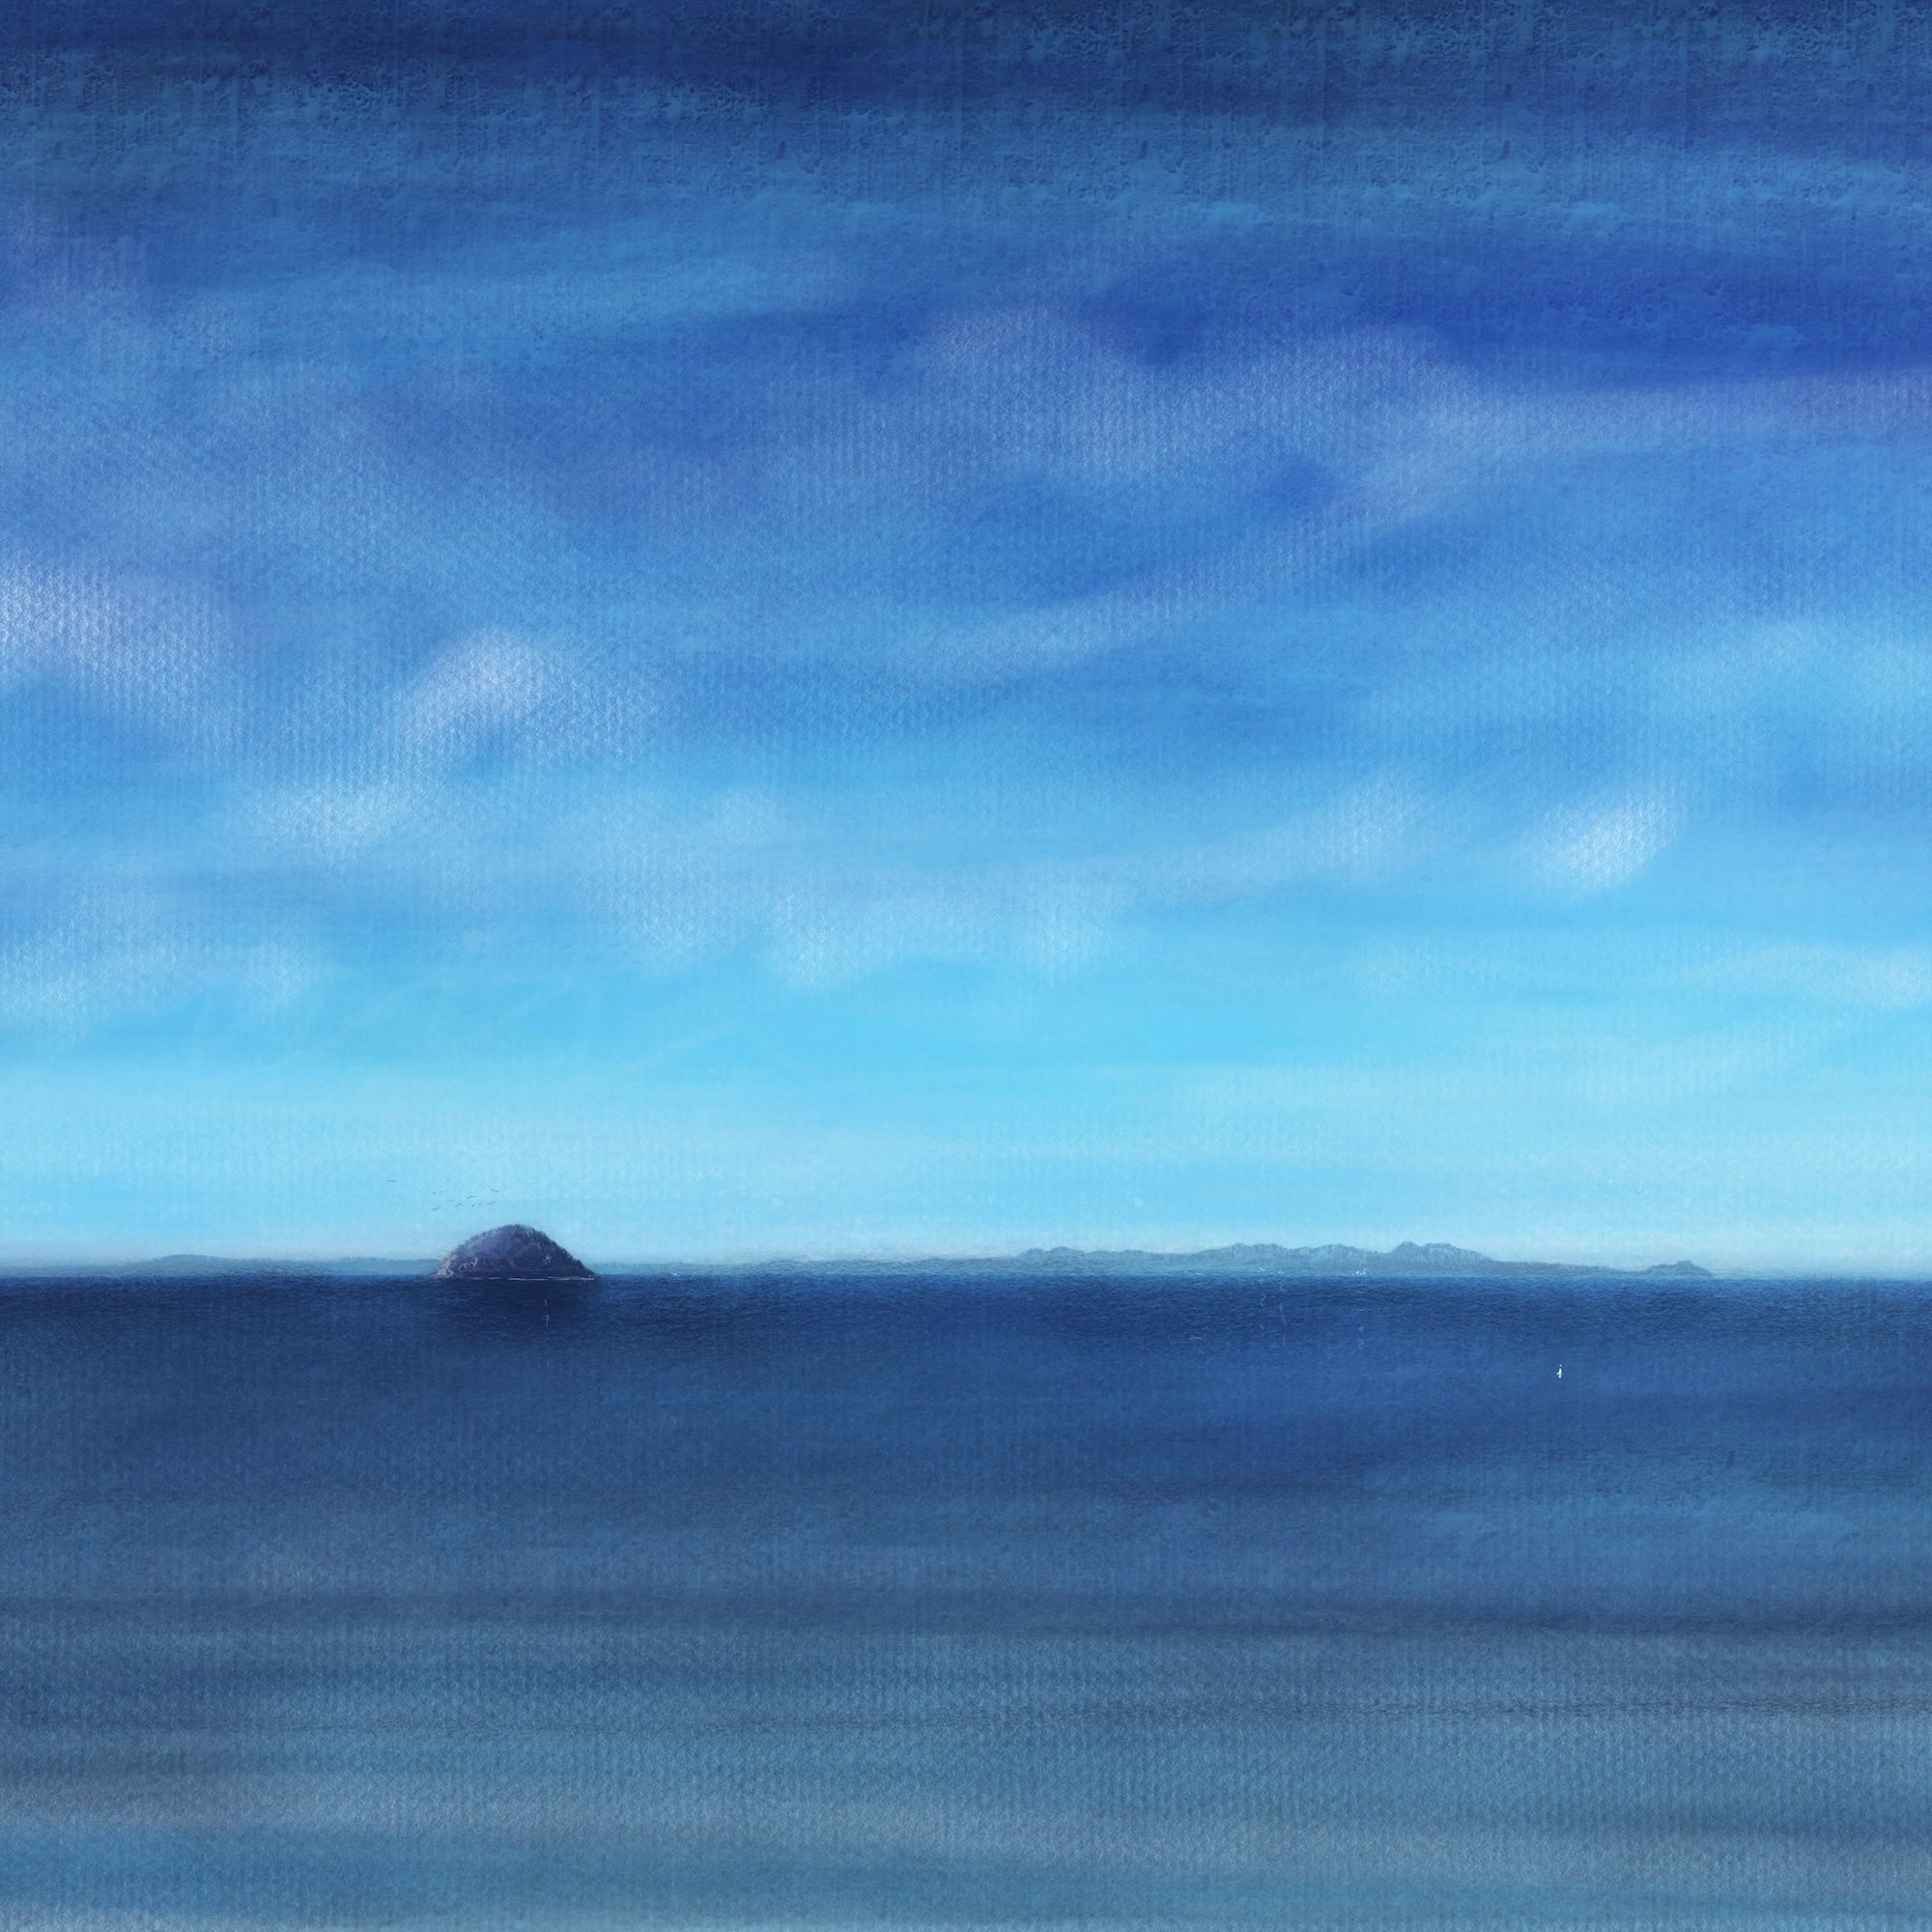 Ailsa Craig & Arran | Scotland In Your Pocket Art Print-Scotland In Your Pocket Framed Prints-Arran Art Gallery-Paintings, Prints, Homeware, Art Gifts From Scotland By Scottish Artist Kevin Hunter